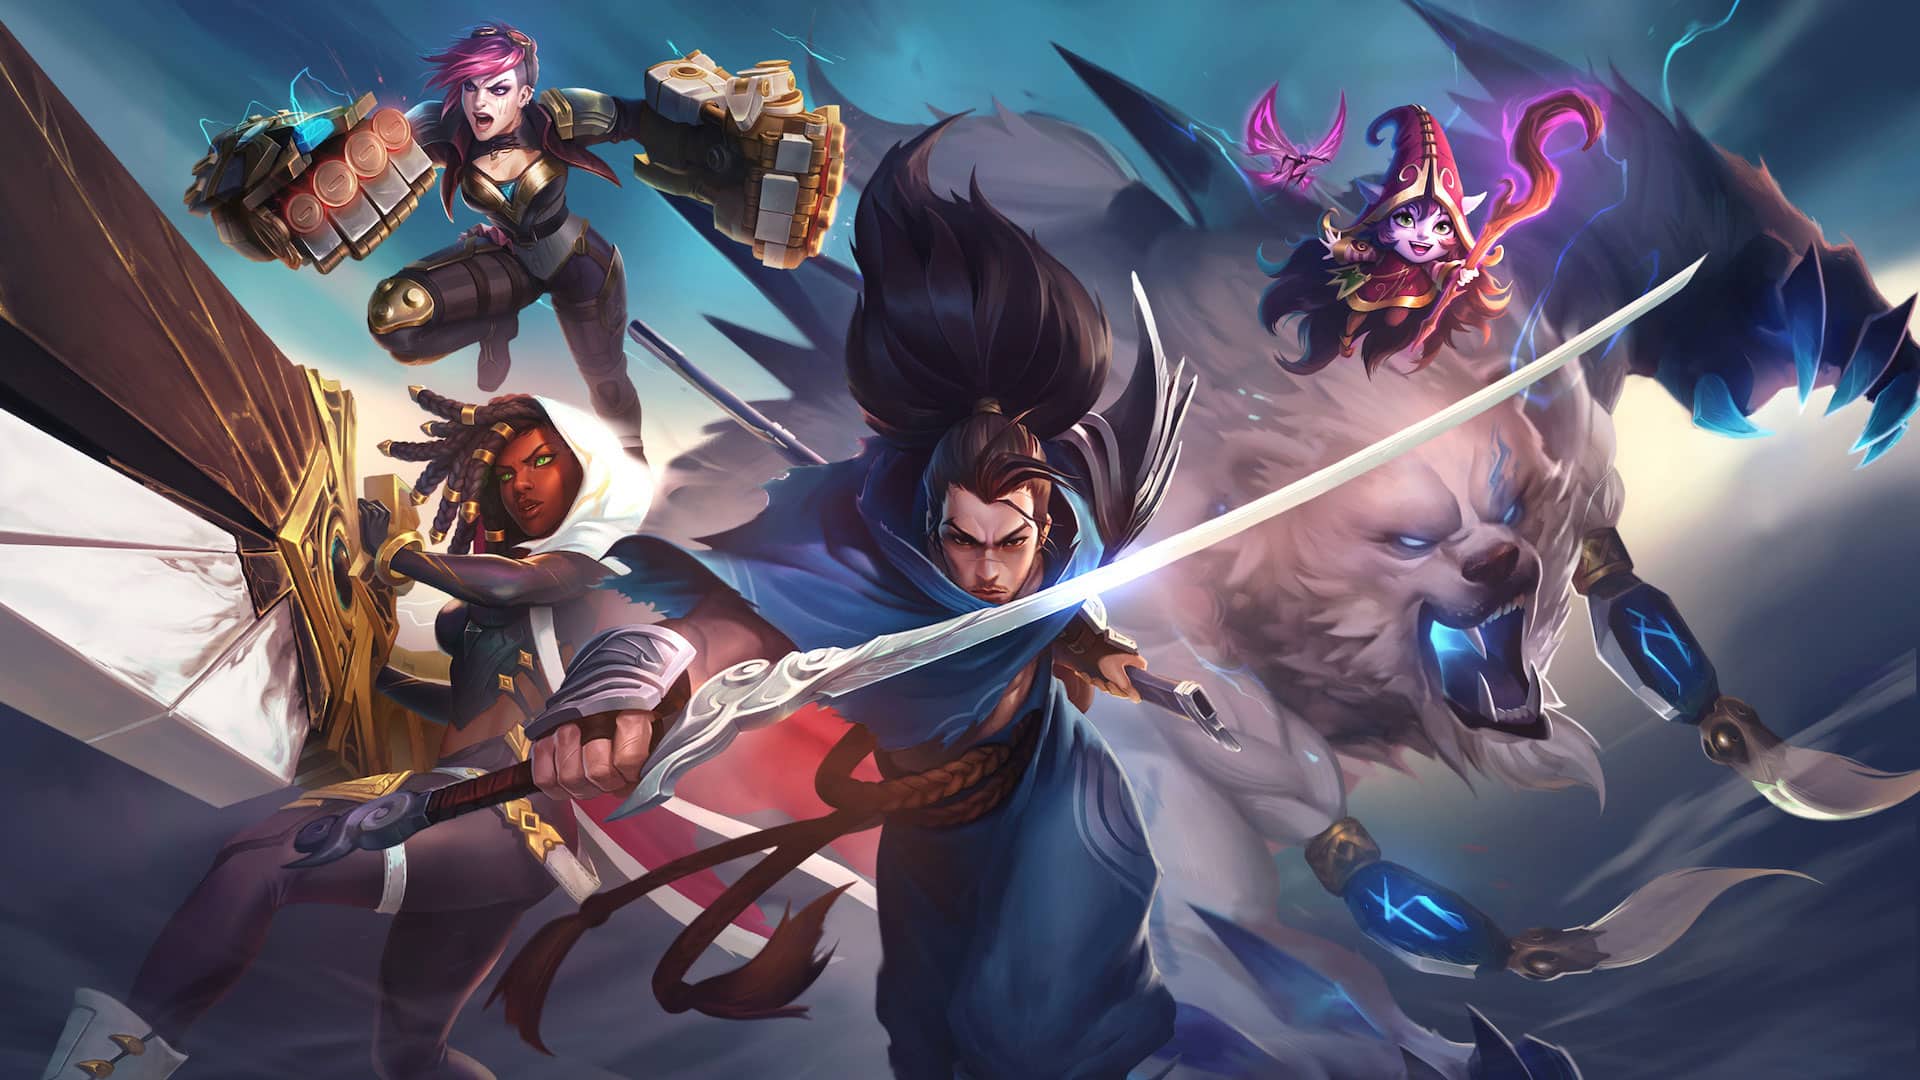 League of Legends has a massive cast of characters a film series could draw from.